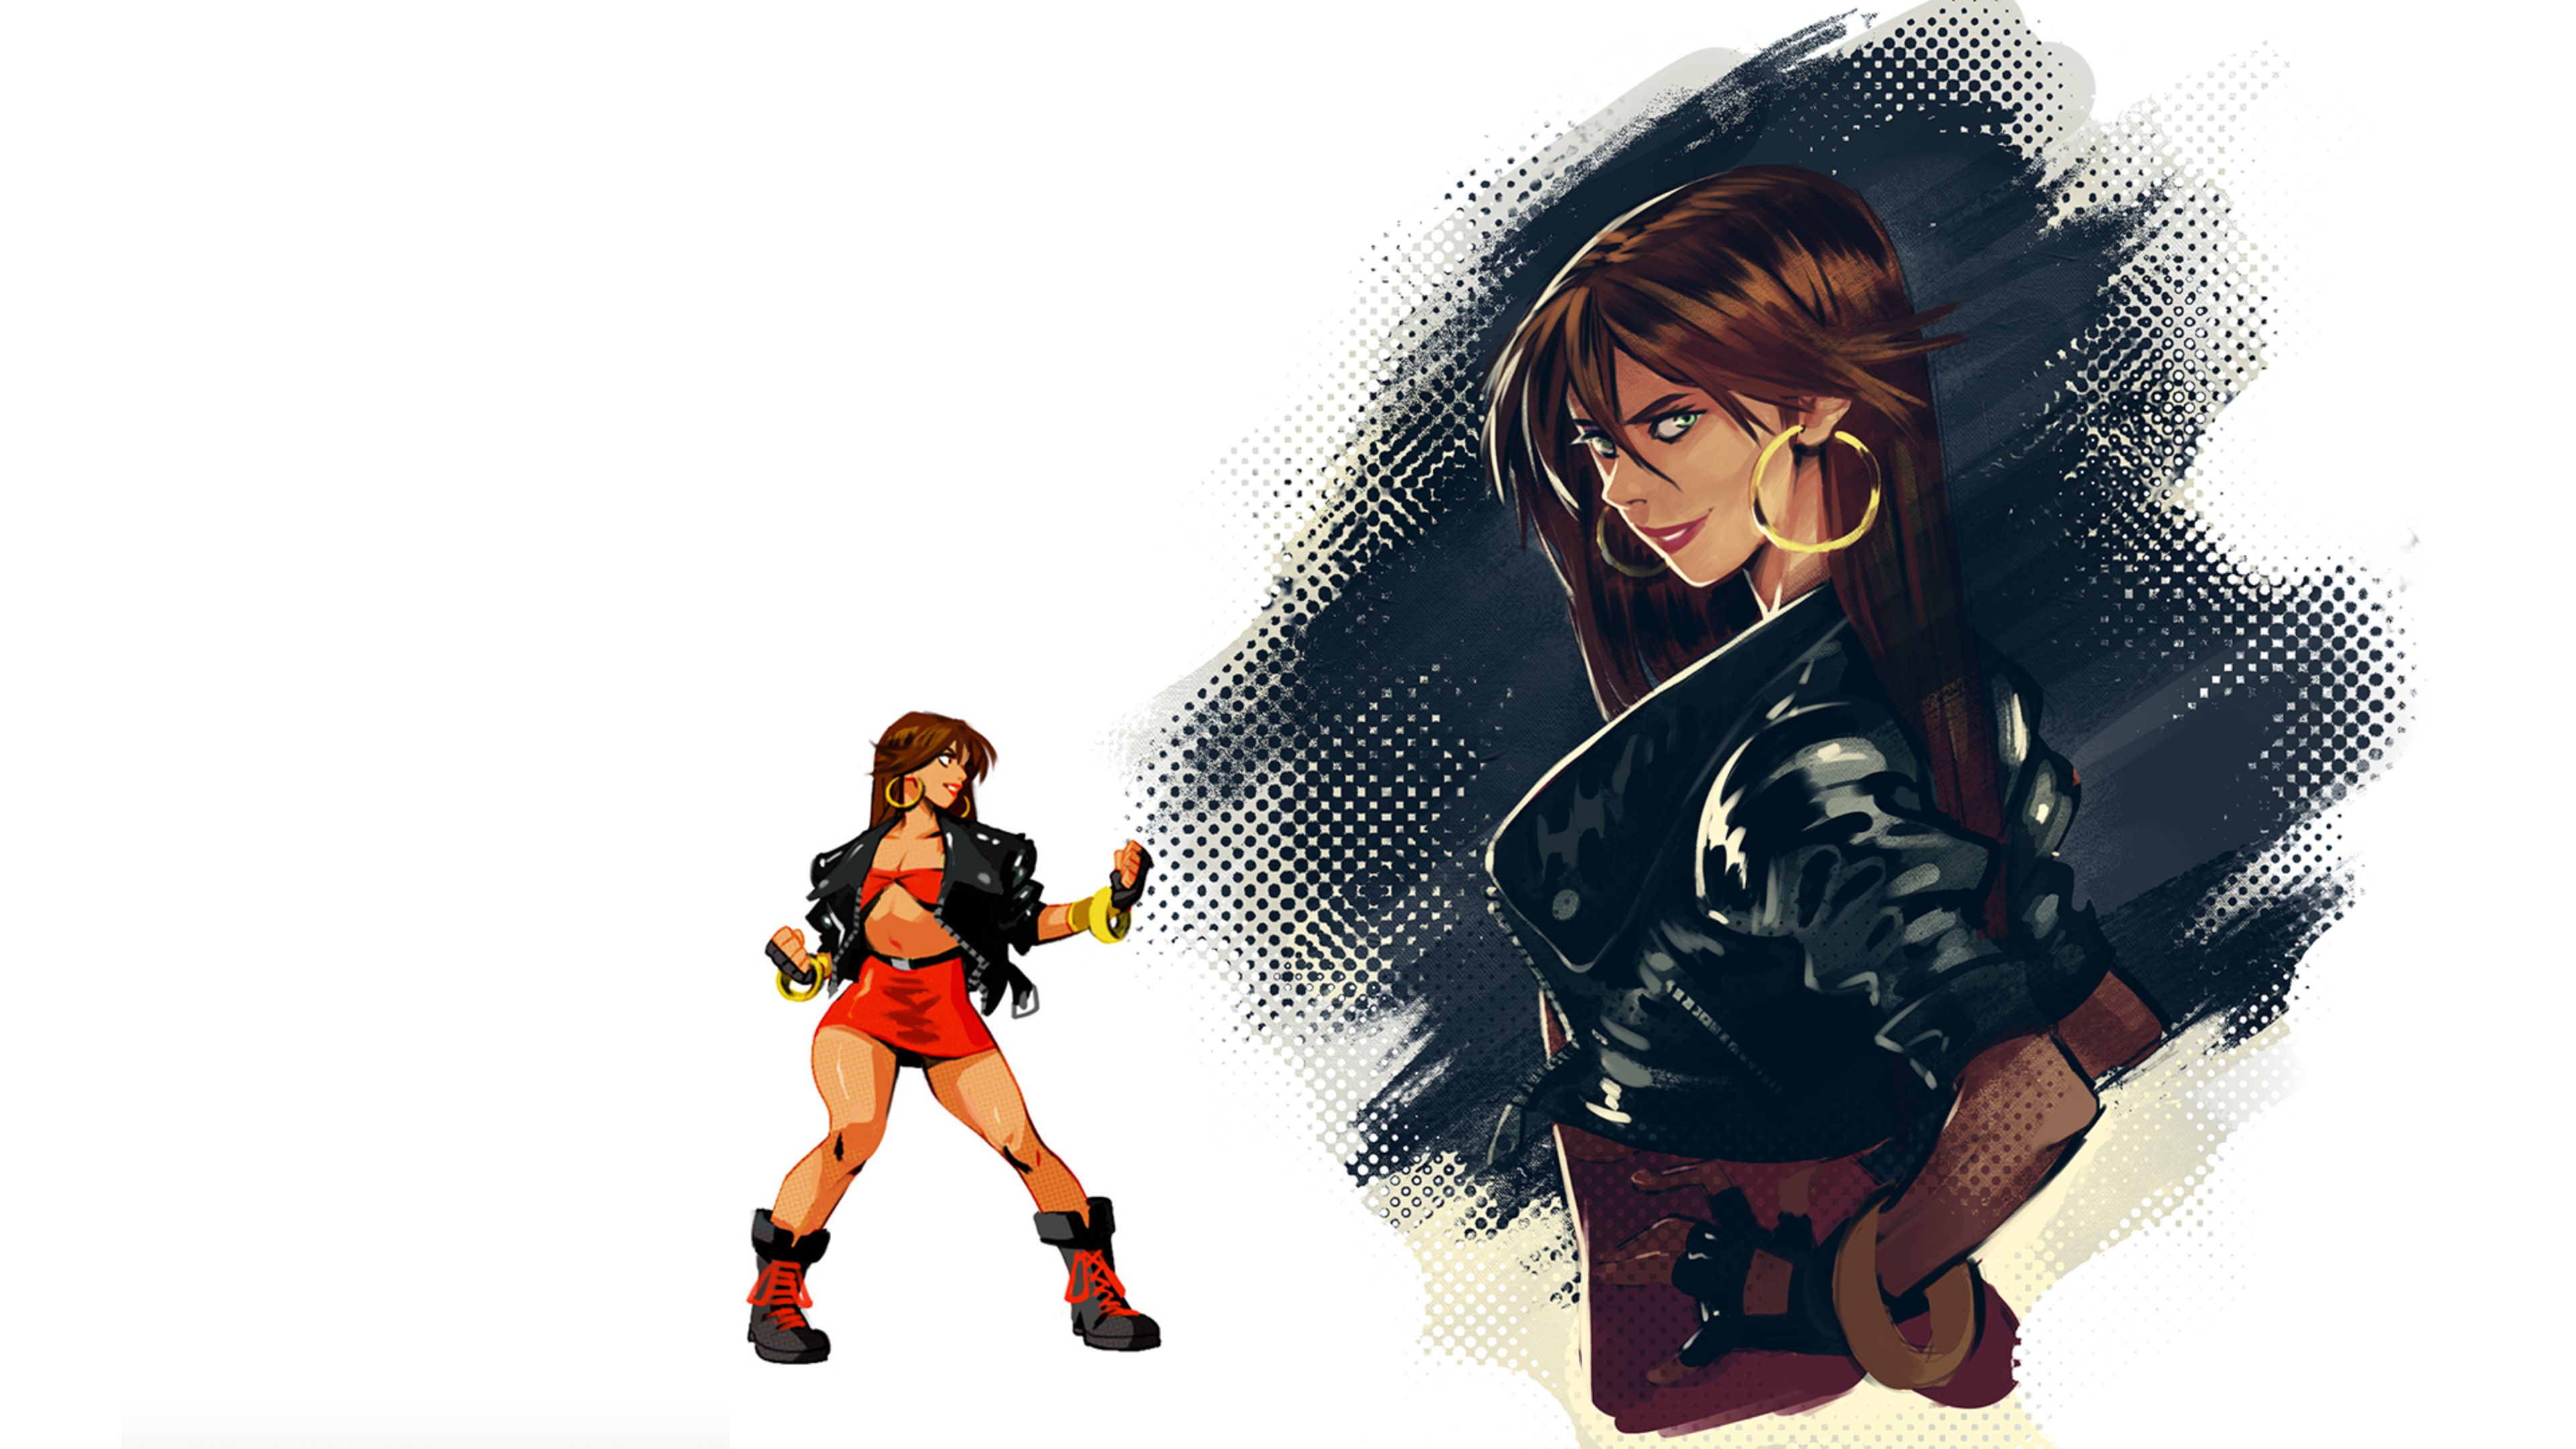 General 3840x2160 Streets of Rage 4 video game art illustration white background Blaze Fielding BARE KNUCKLE women video game girls video game warriors hoop earrings simple background